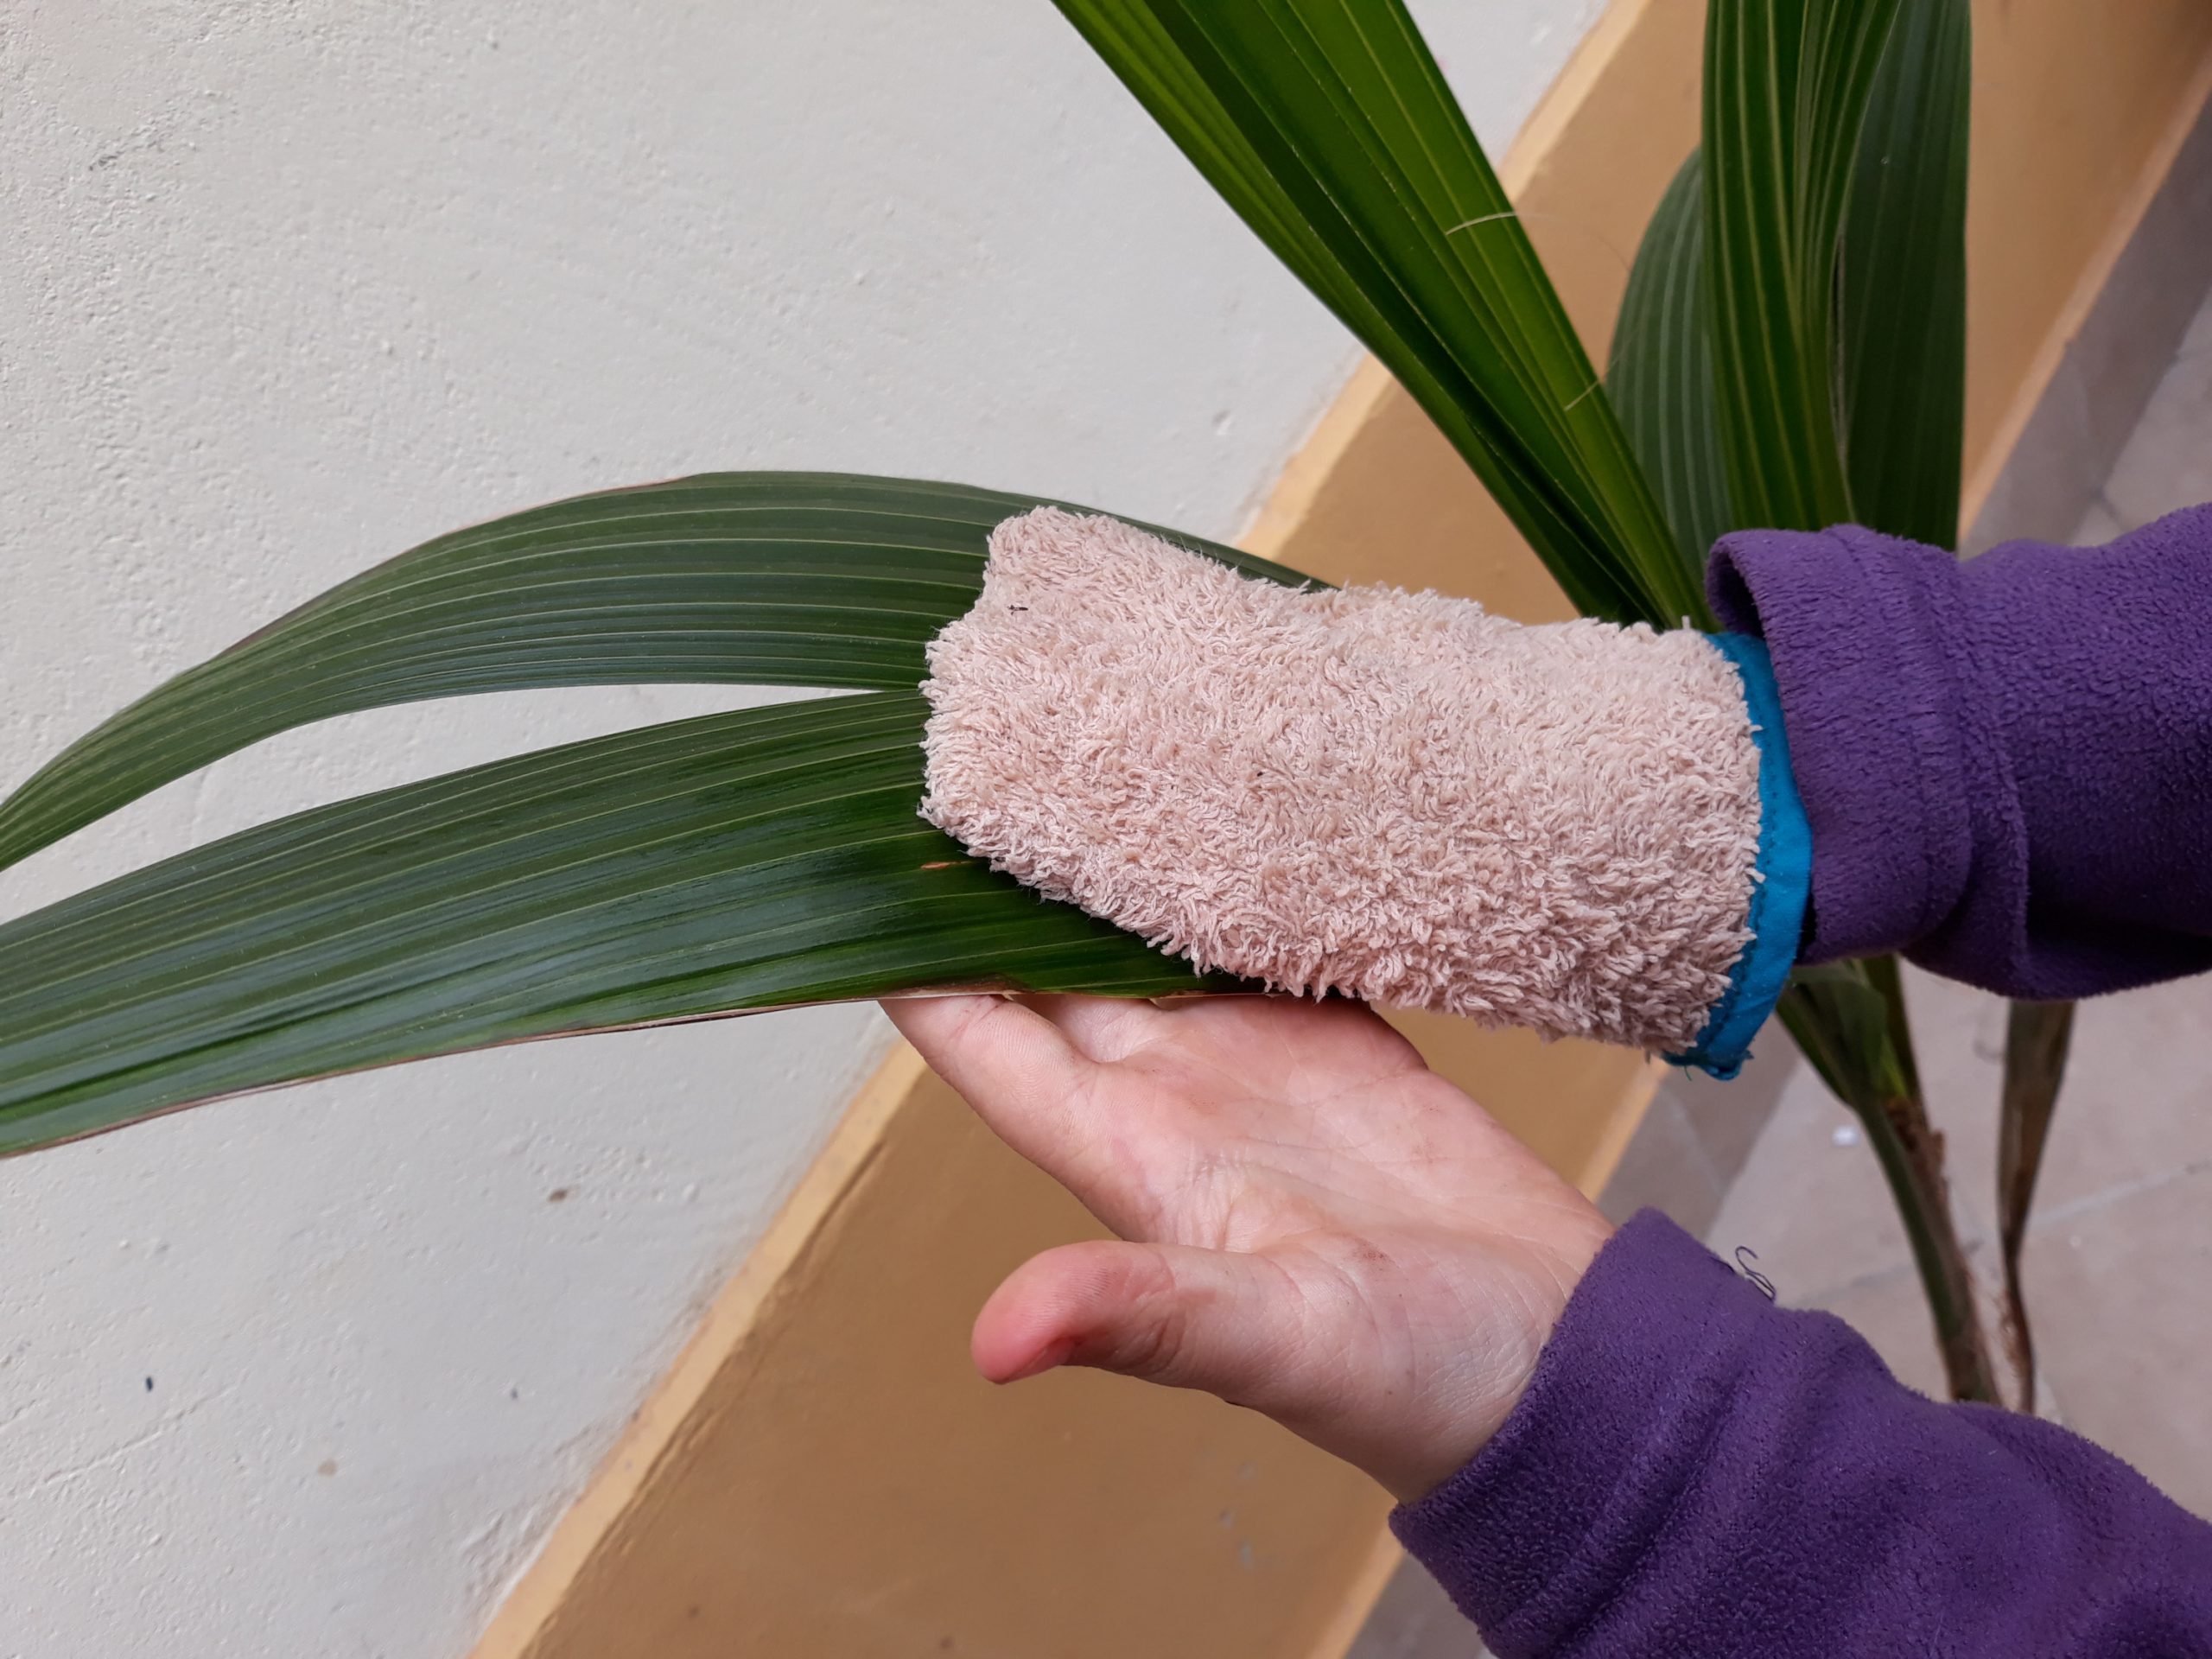 cleaning mitt care of plants